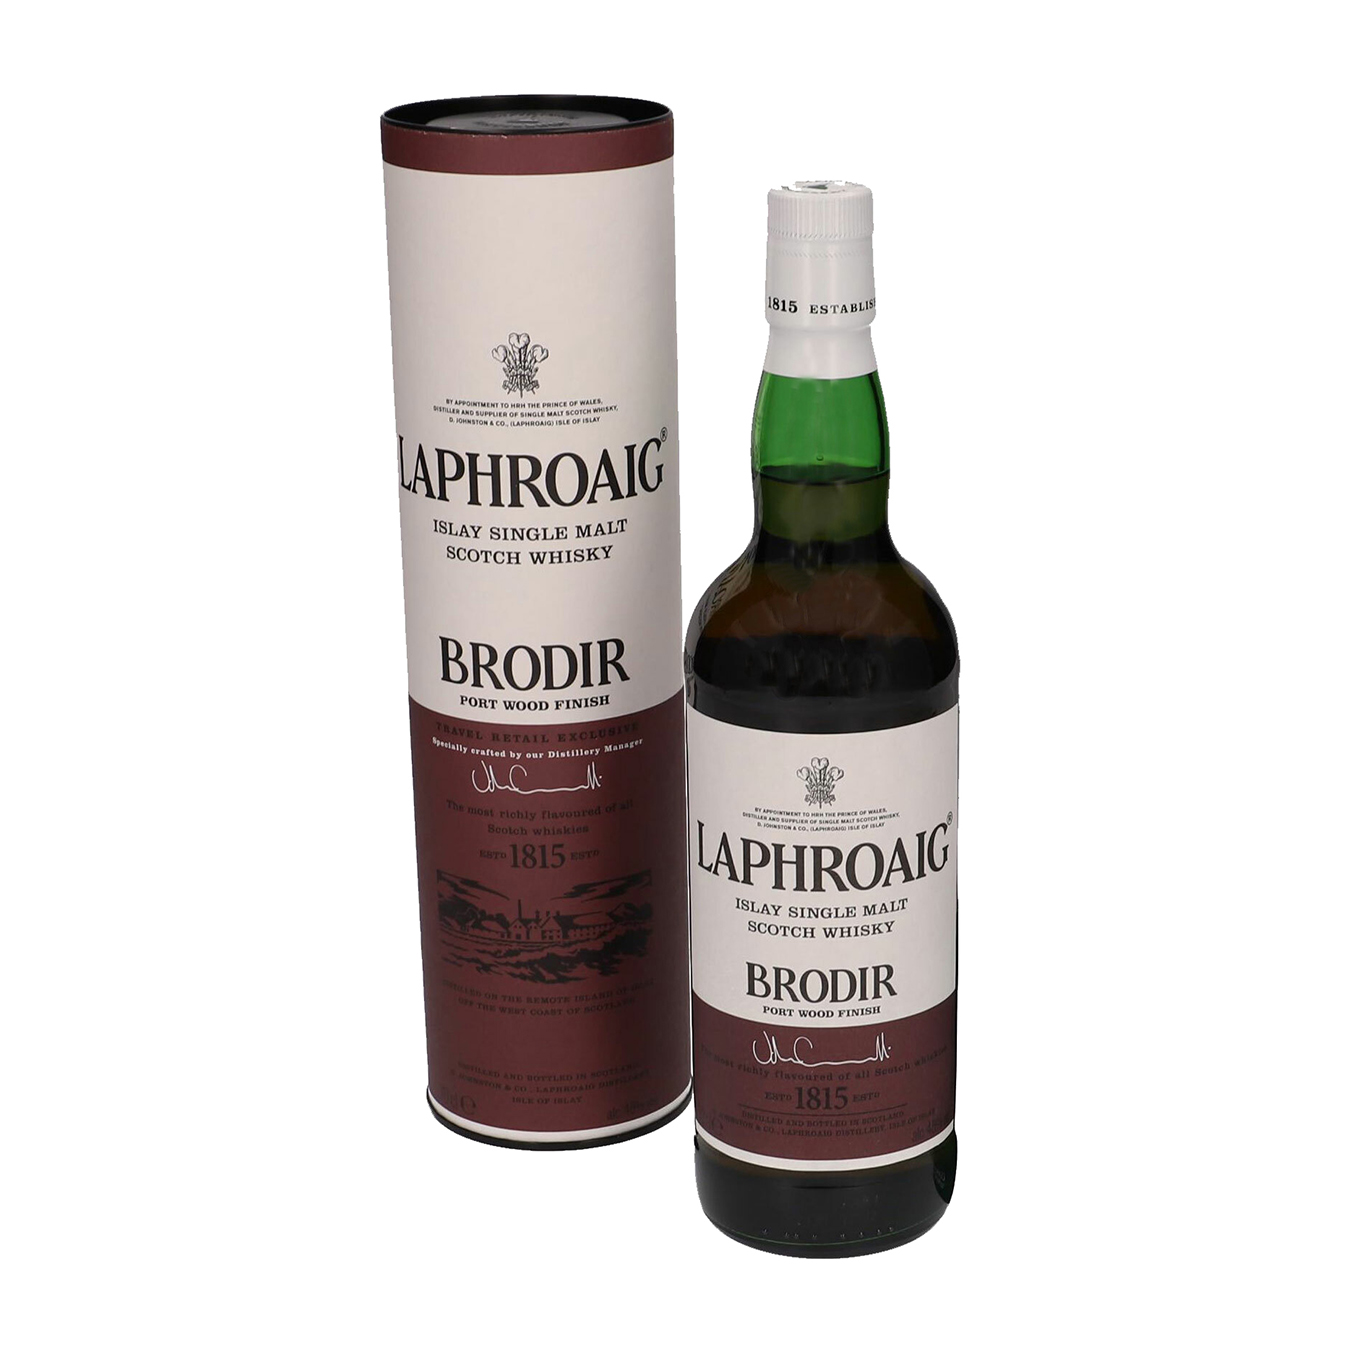 You are currently viewing Laphroaig Brodir – Batch #1